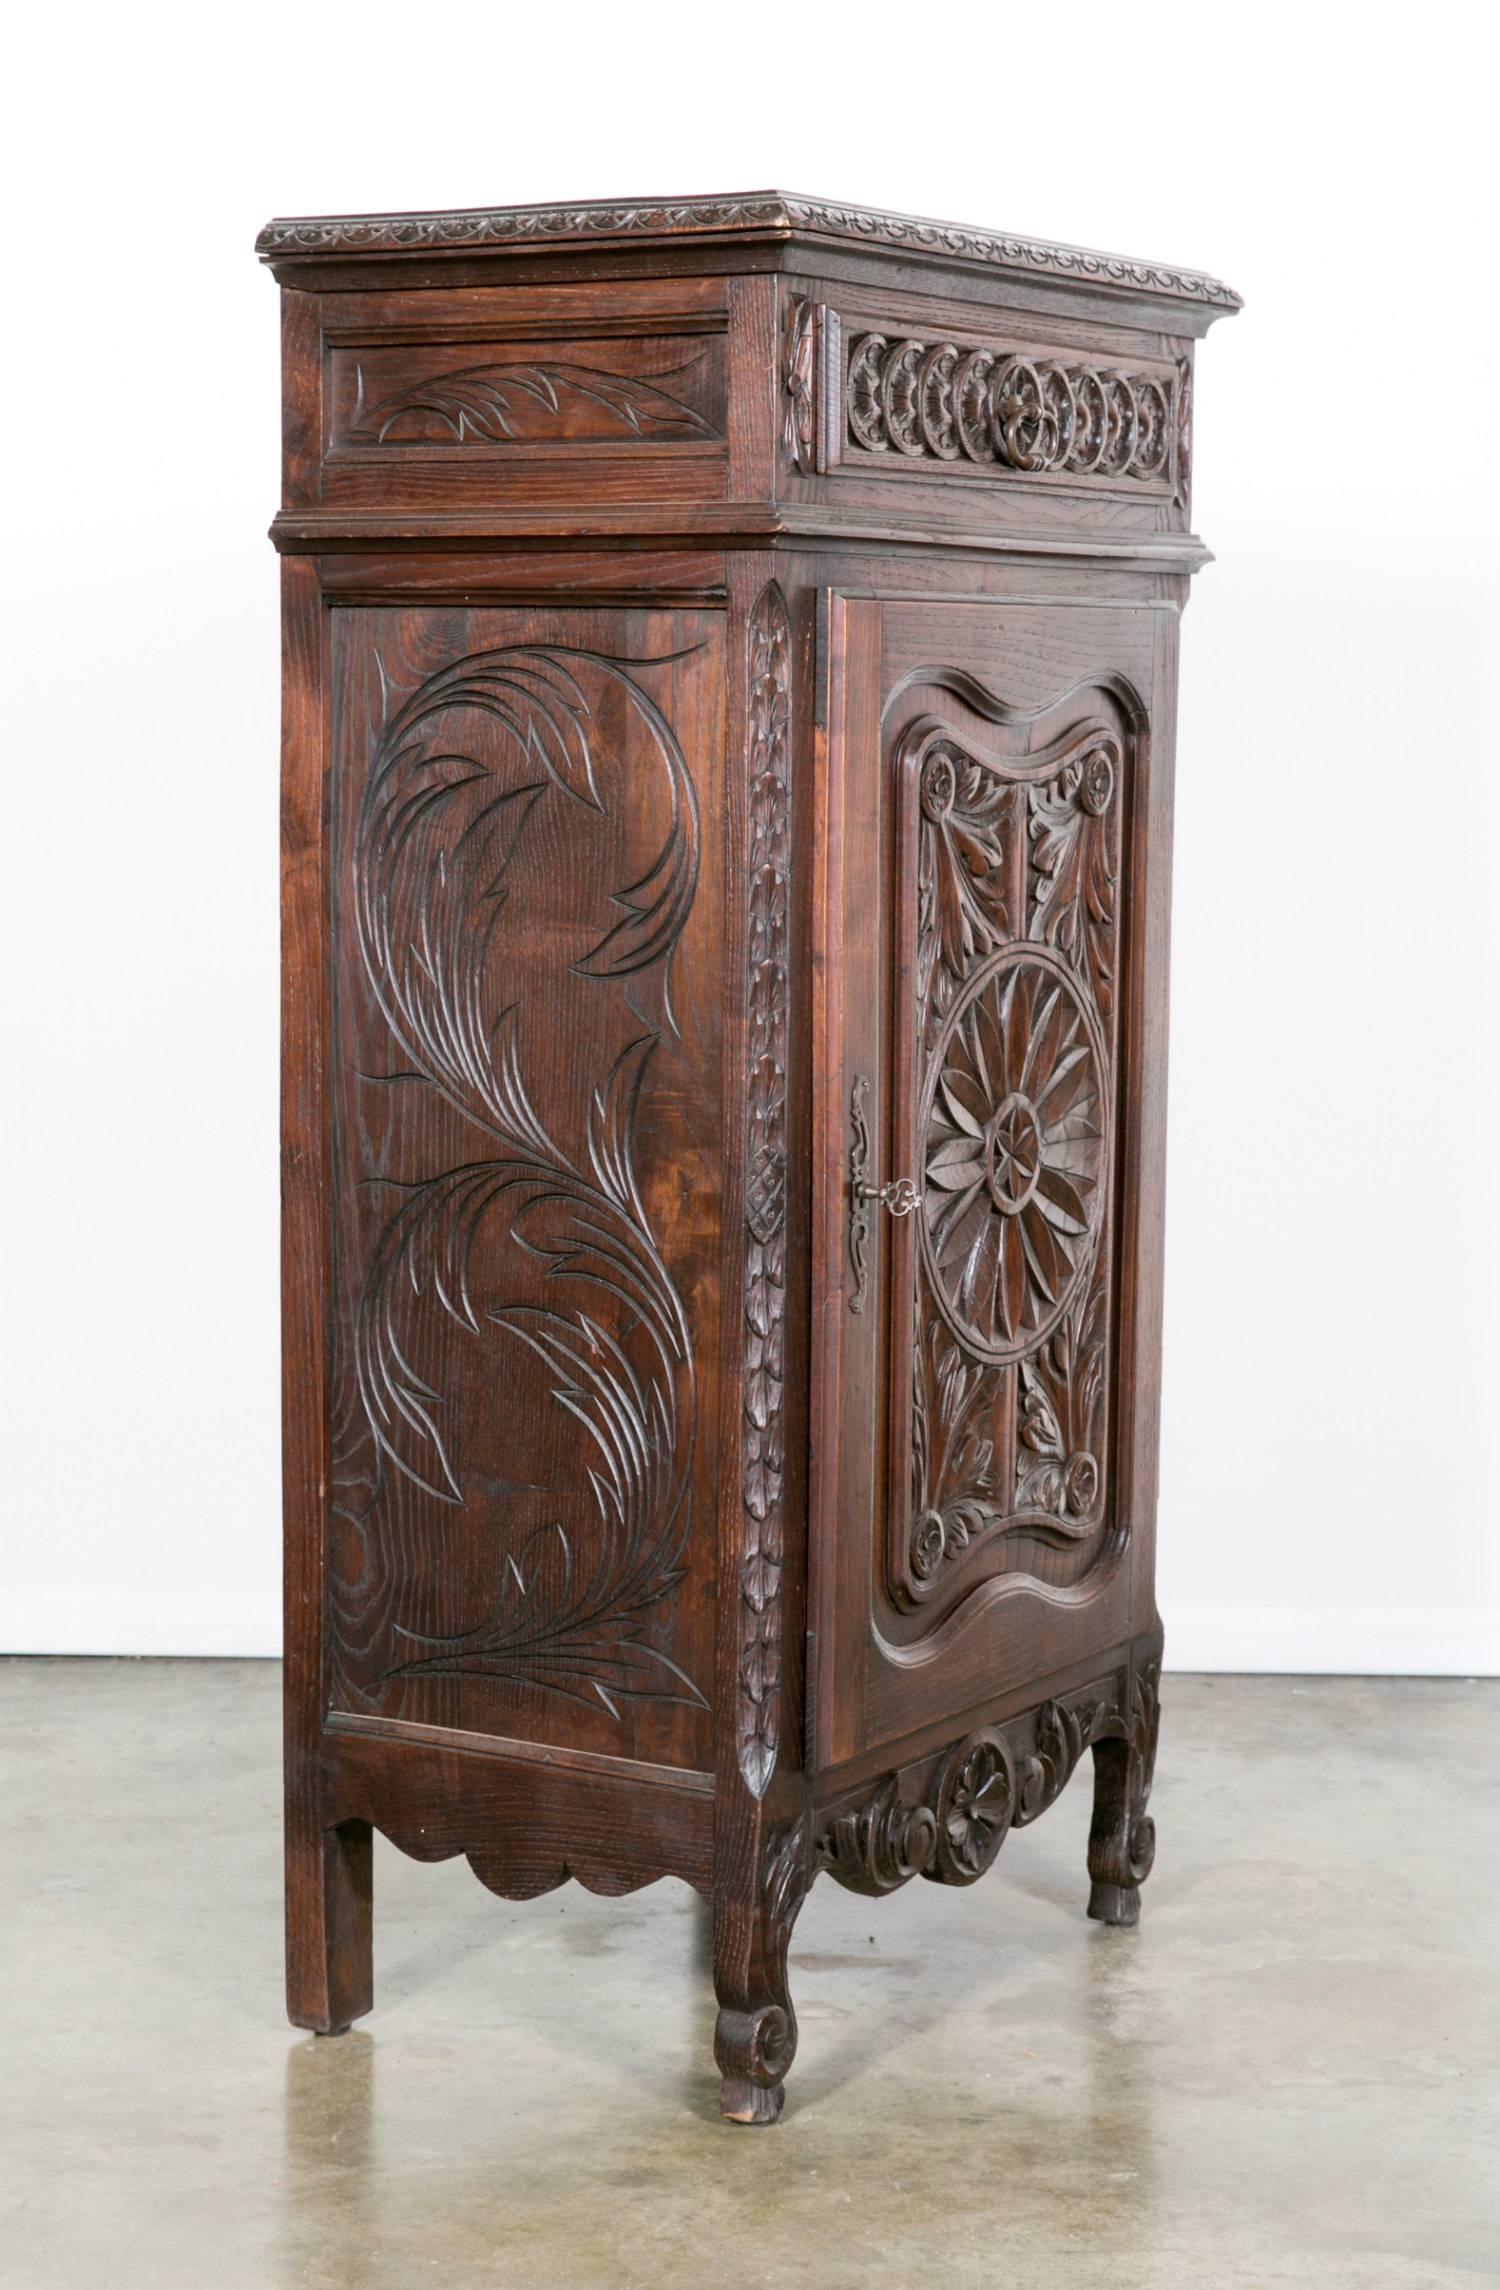 Antique Country French Louis XV style confiturier (jam holder) from Normandie, circa 1880s. Handcrafted of oak with some of the finest hand-carved details. Two interior shelves. Carved apron resting on short raised cabriole legs ending in scrolled